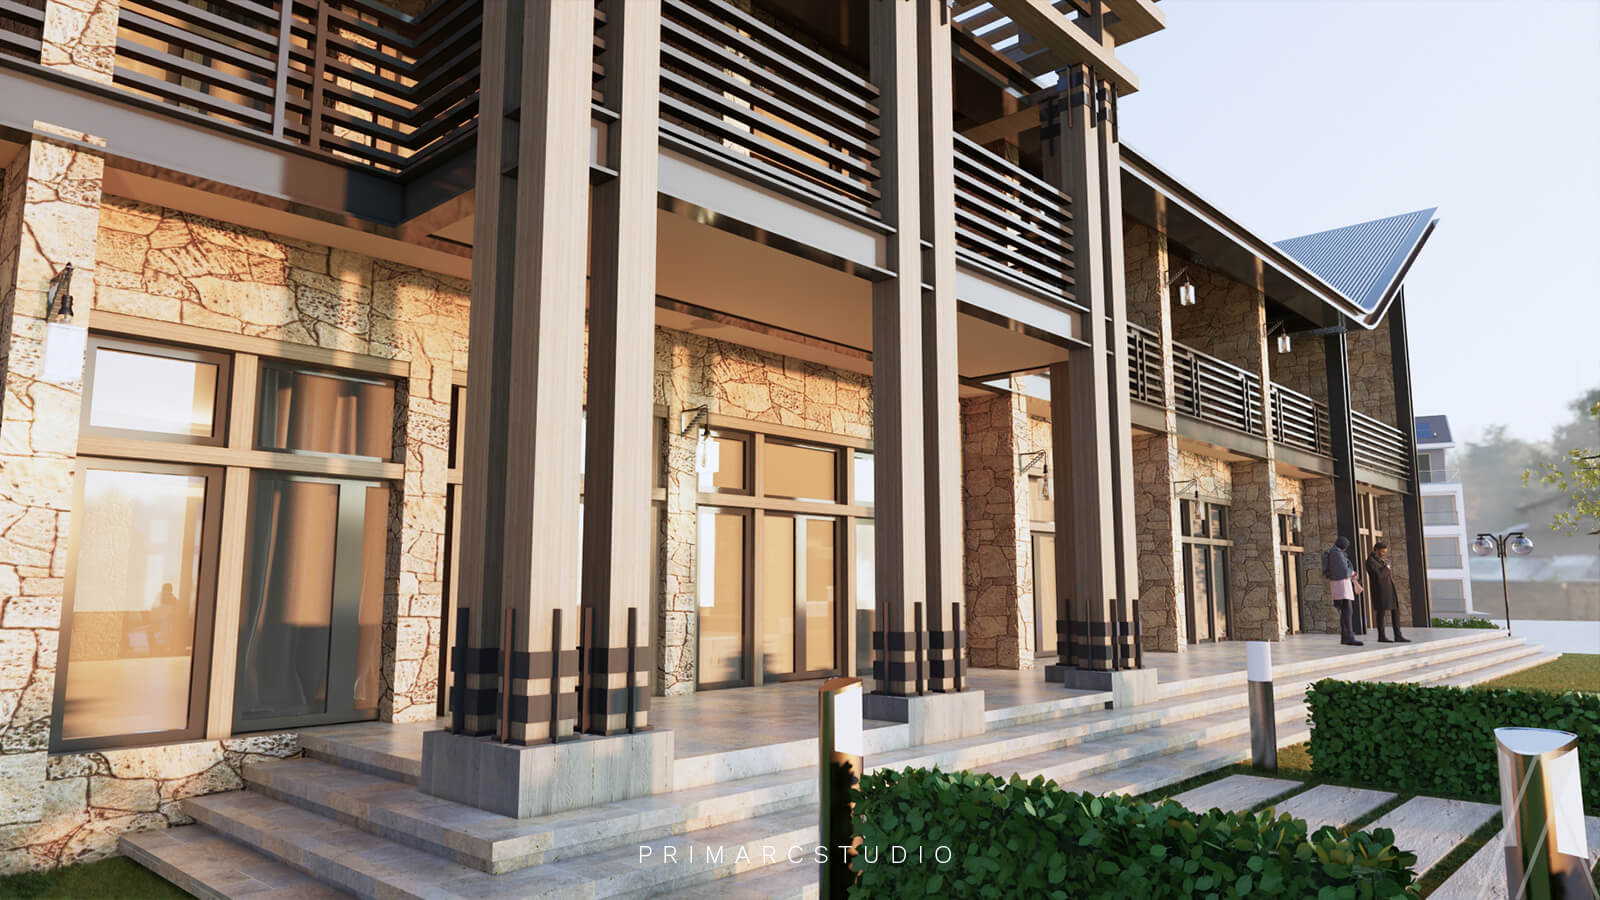 Entrance in modern style with local materials integrated in the exterior